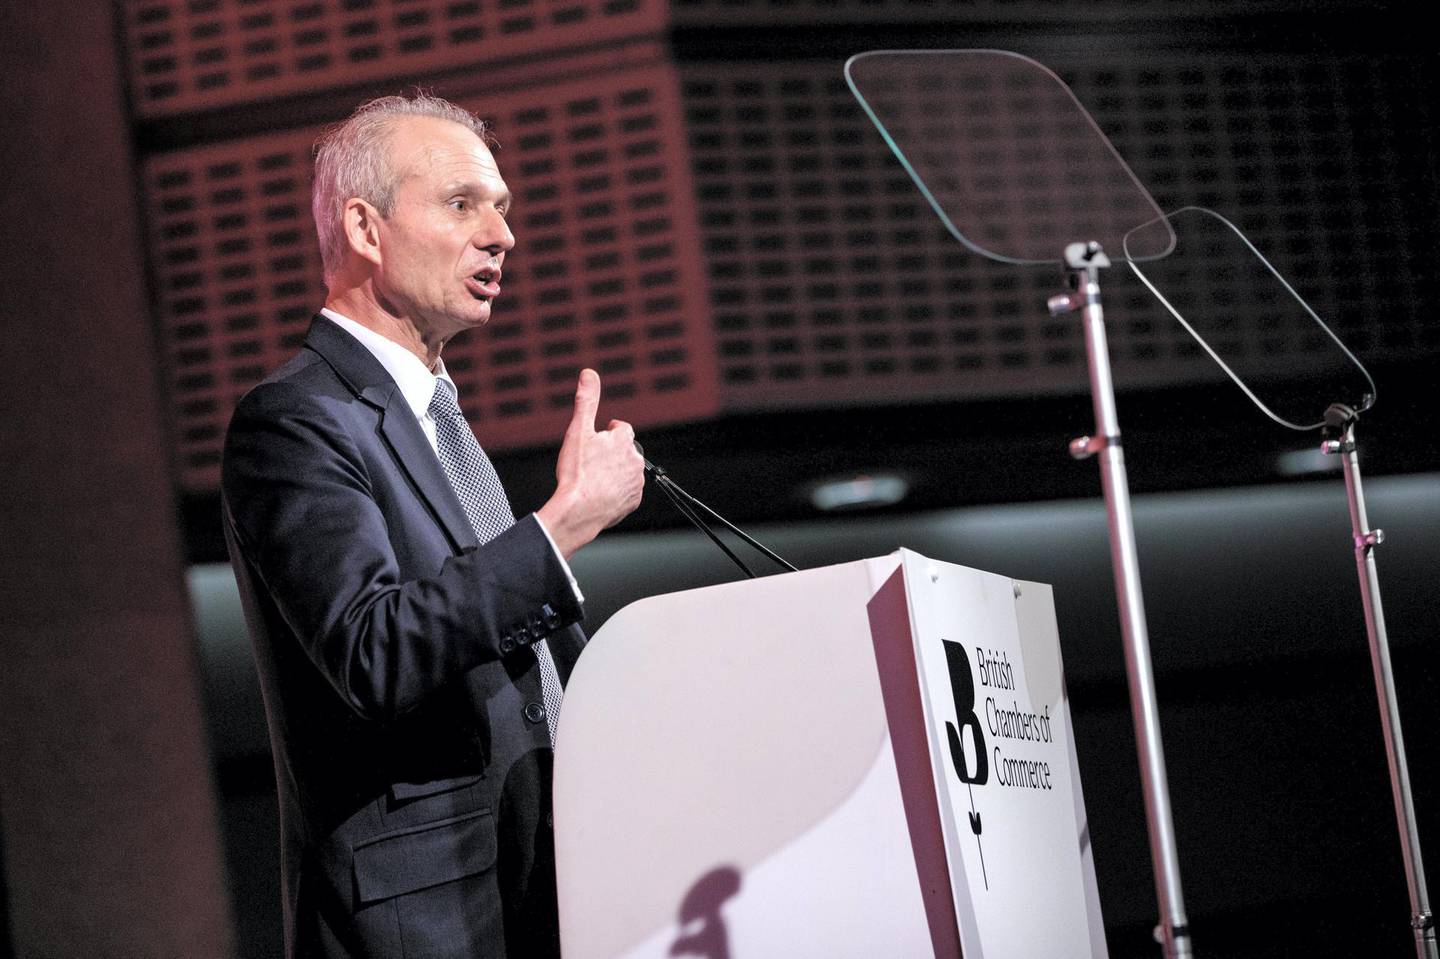 LONDON, ENGLAND - MARCH 28: Duchy of Lancaster and Minister for the Cabinet Office David Lidington speaks at the annual British Chambers of Commerce conference on March 28, 2019 in London, England. (Photo by Jack Taylor/Getty Images)